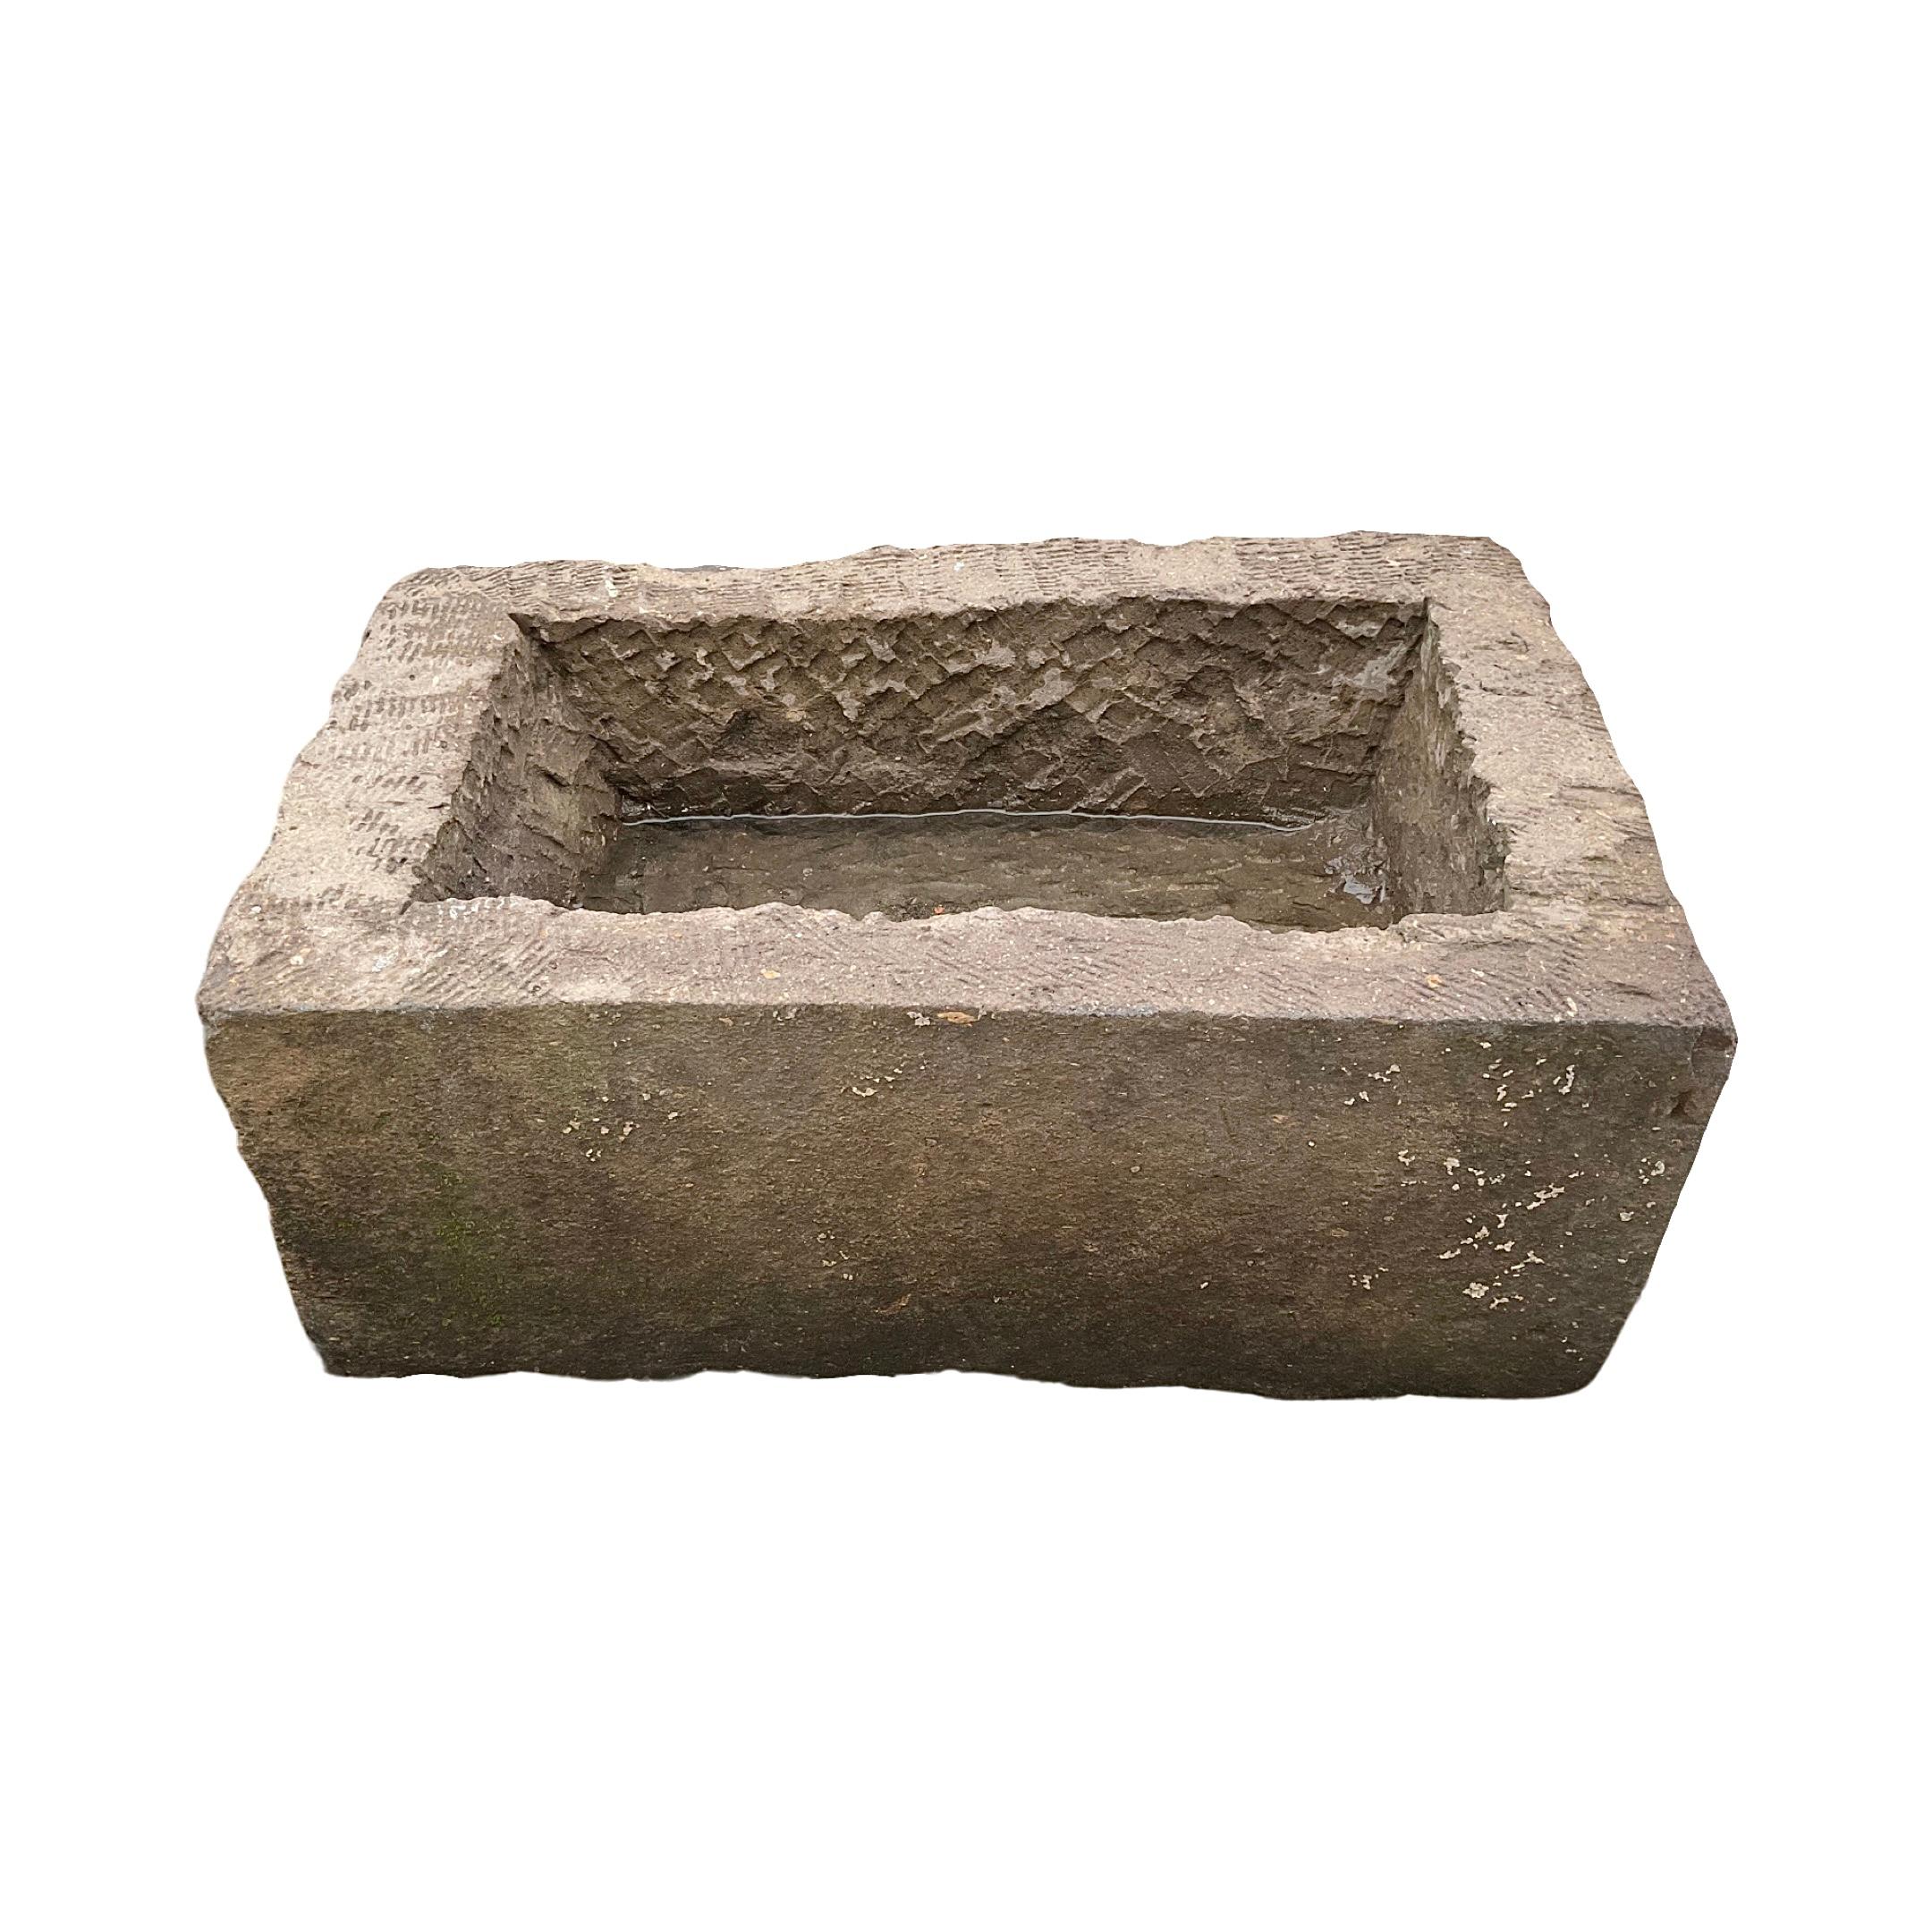 This French Limestone Trough is a small style size trough made in France during the 18th century. Crafted from high-quality limestone, it offers a touch of elegance and sophistication to any outdoor or indoor space. Its smaller size makes it